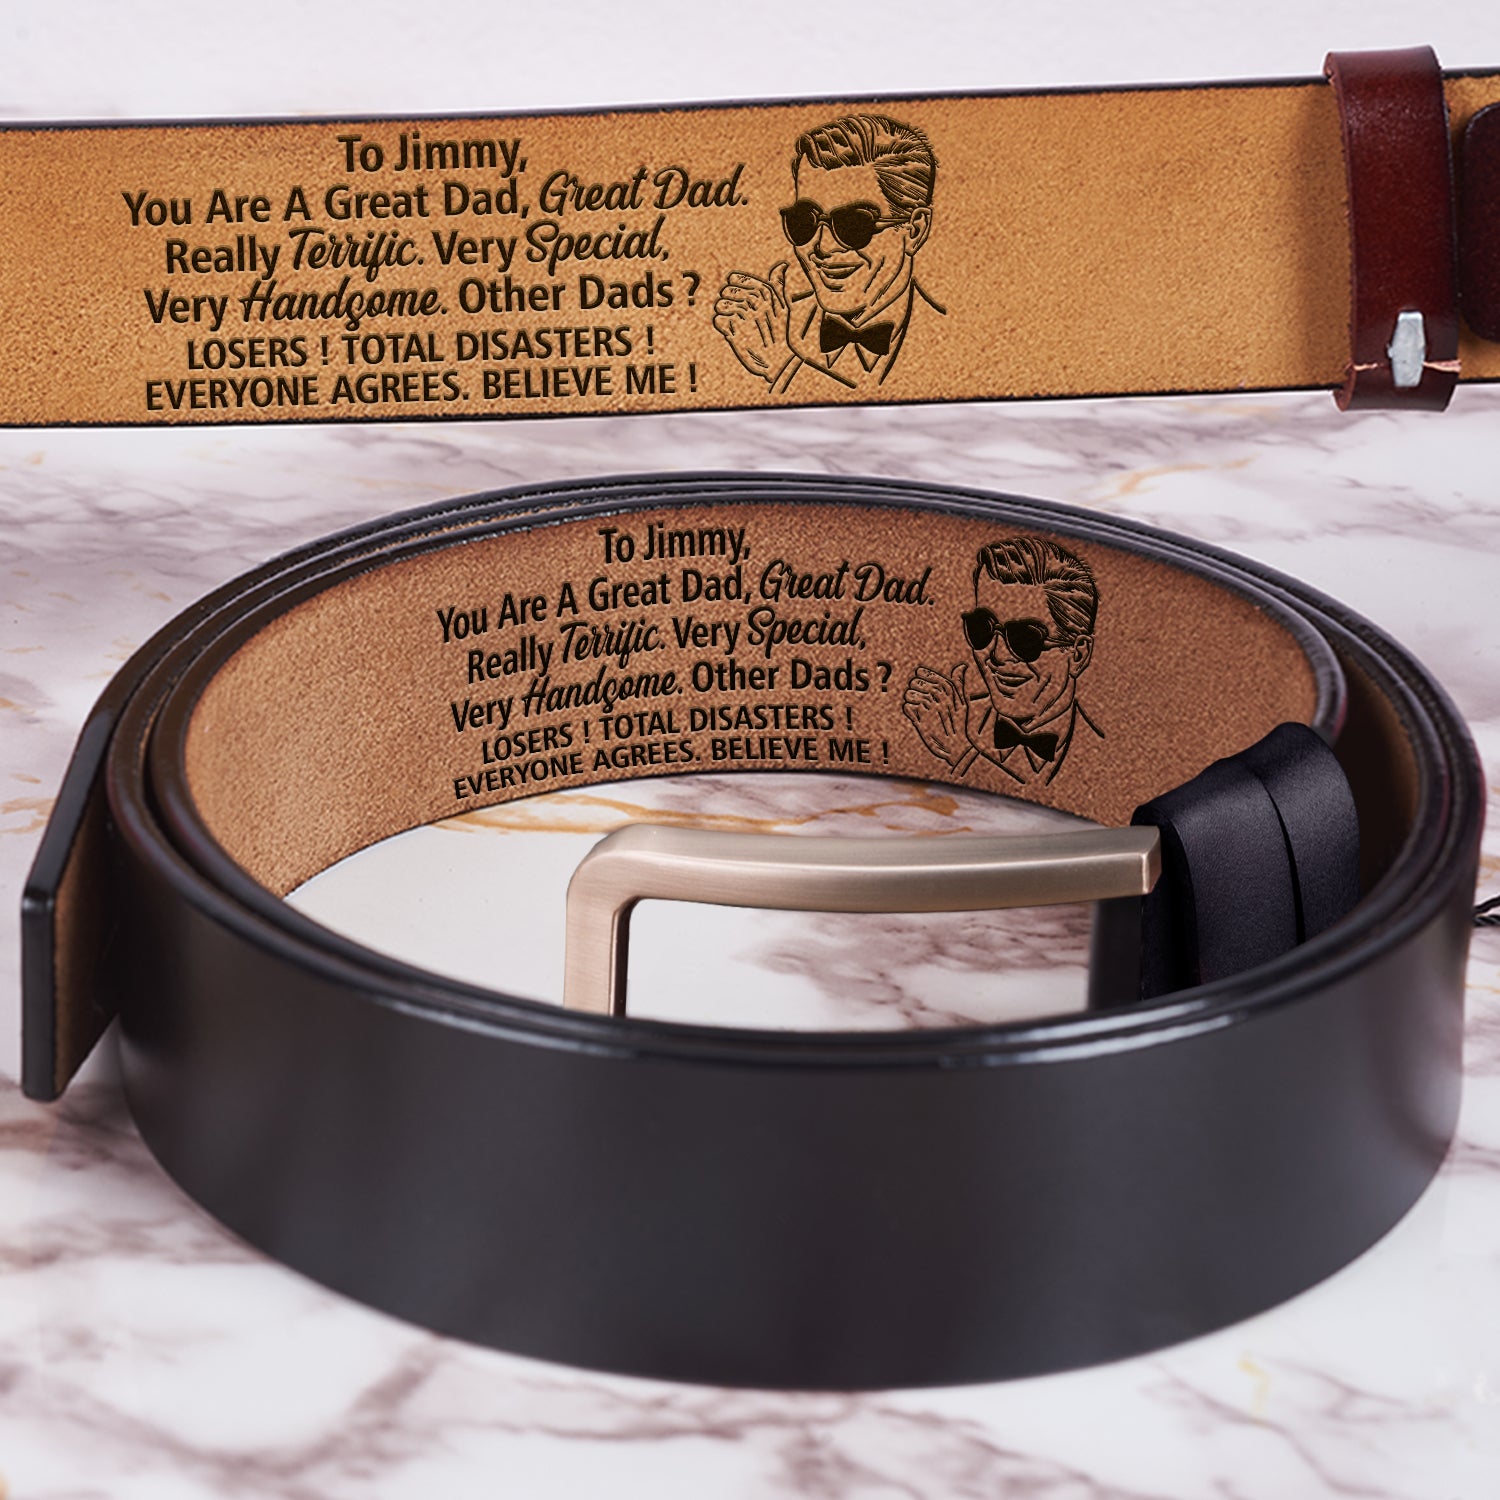 You Are A Great Dad - Gift For Father, Daddy, Granddad - Personalized Engraved Leather Belt